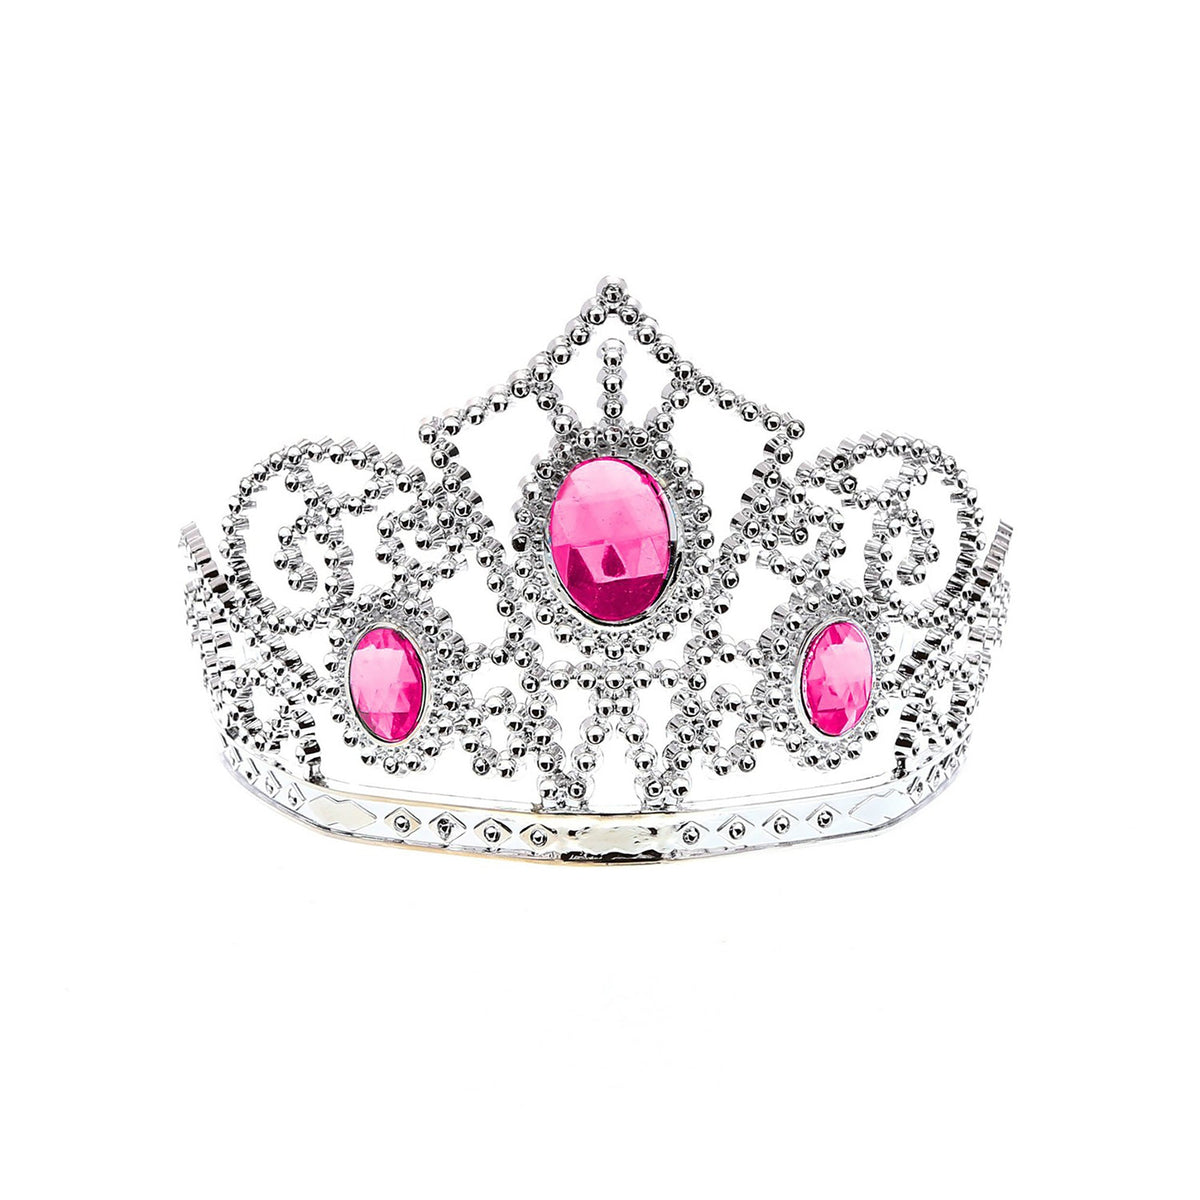 IVY TRADING INC. Costume Accessories Pink Plastic Jeweled Tiara, 1 Count 8336572000615